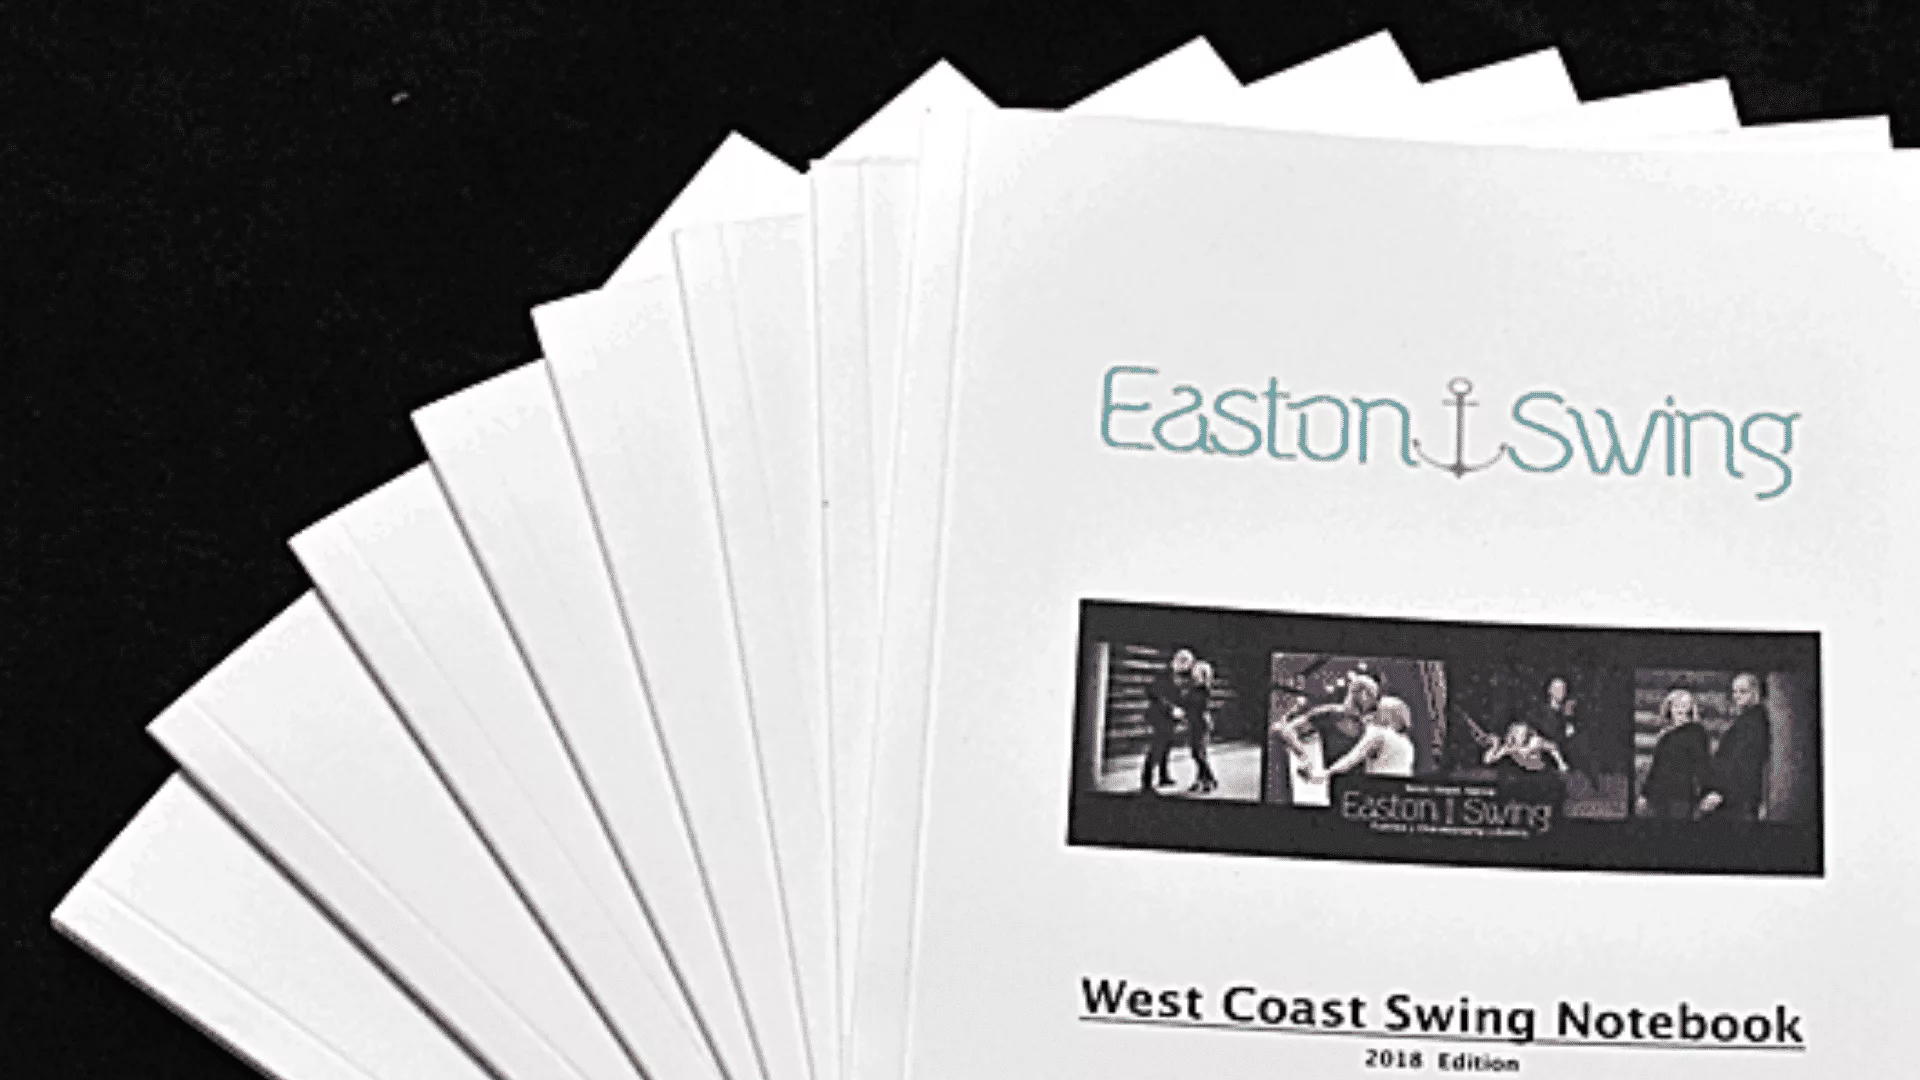 West Coast Swing notebook for Levels 1-3 photographed on a black background